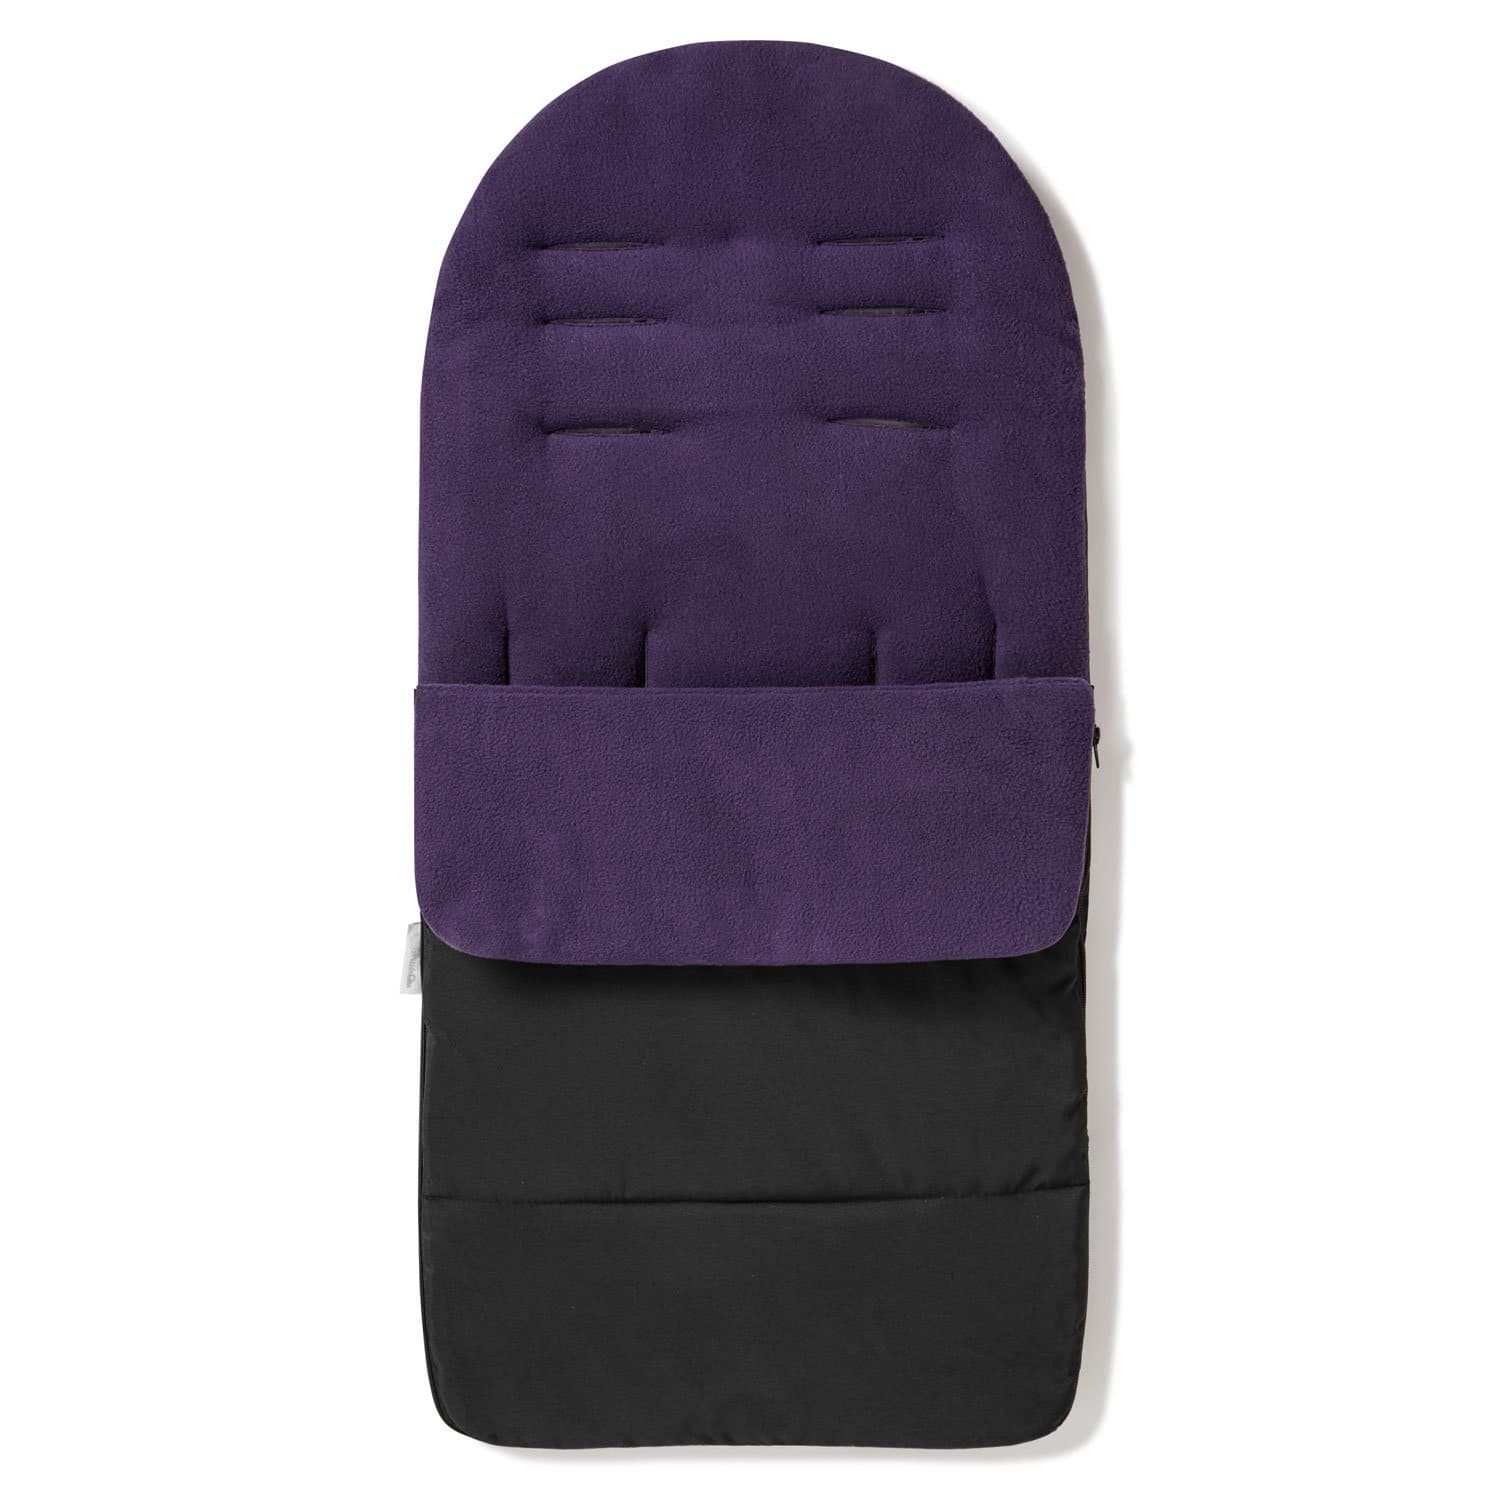 Premium Footmuff / Cosy Toes Compatible with Stokke - Plum Purple / Fits All Models | For Your Little One